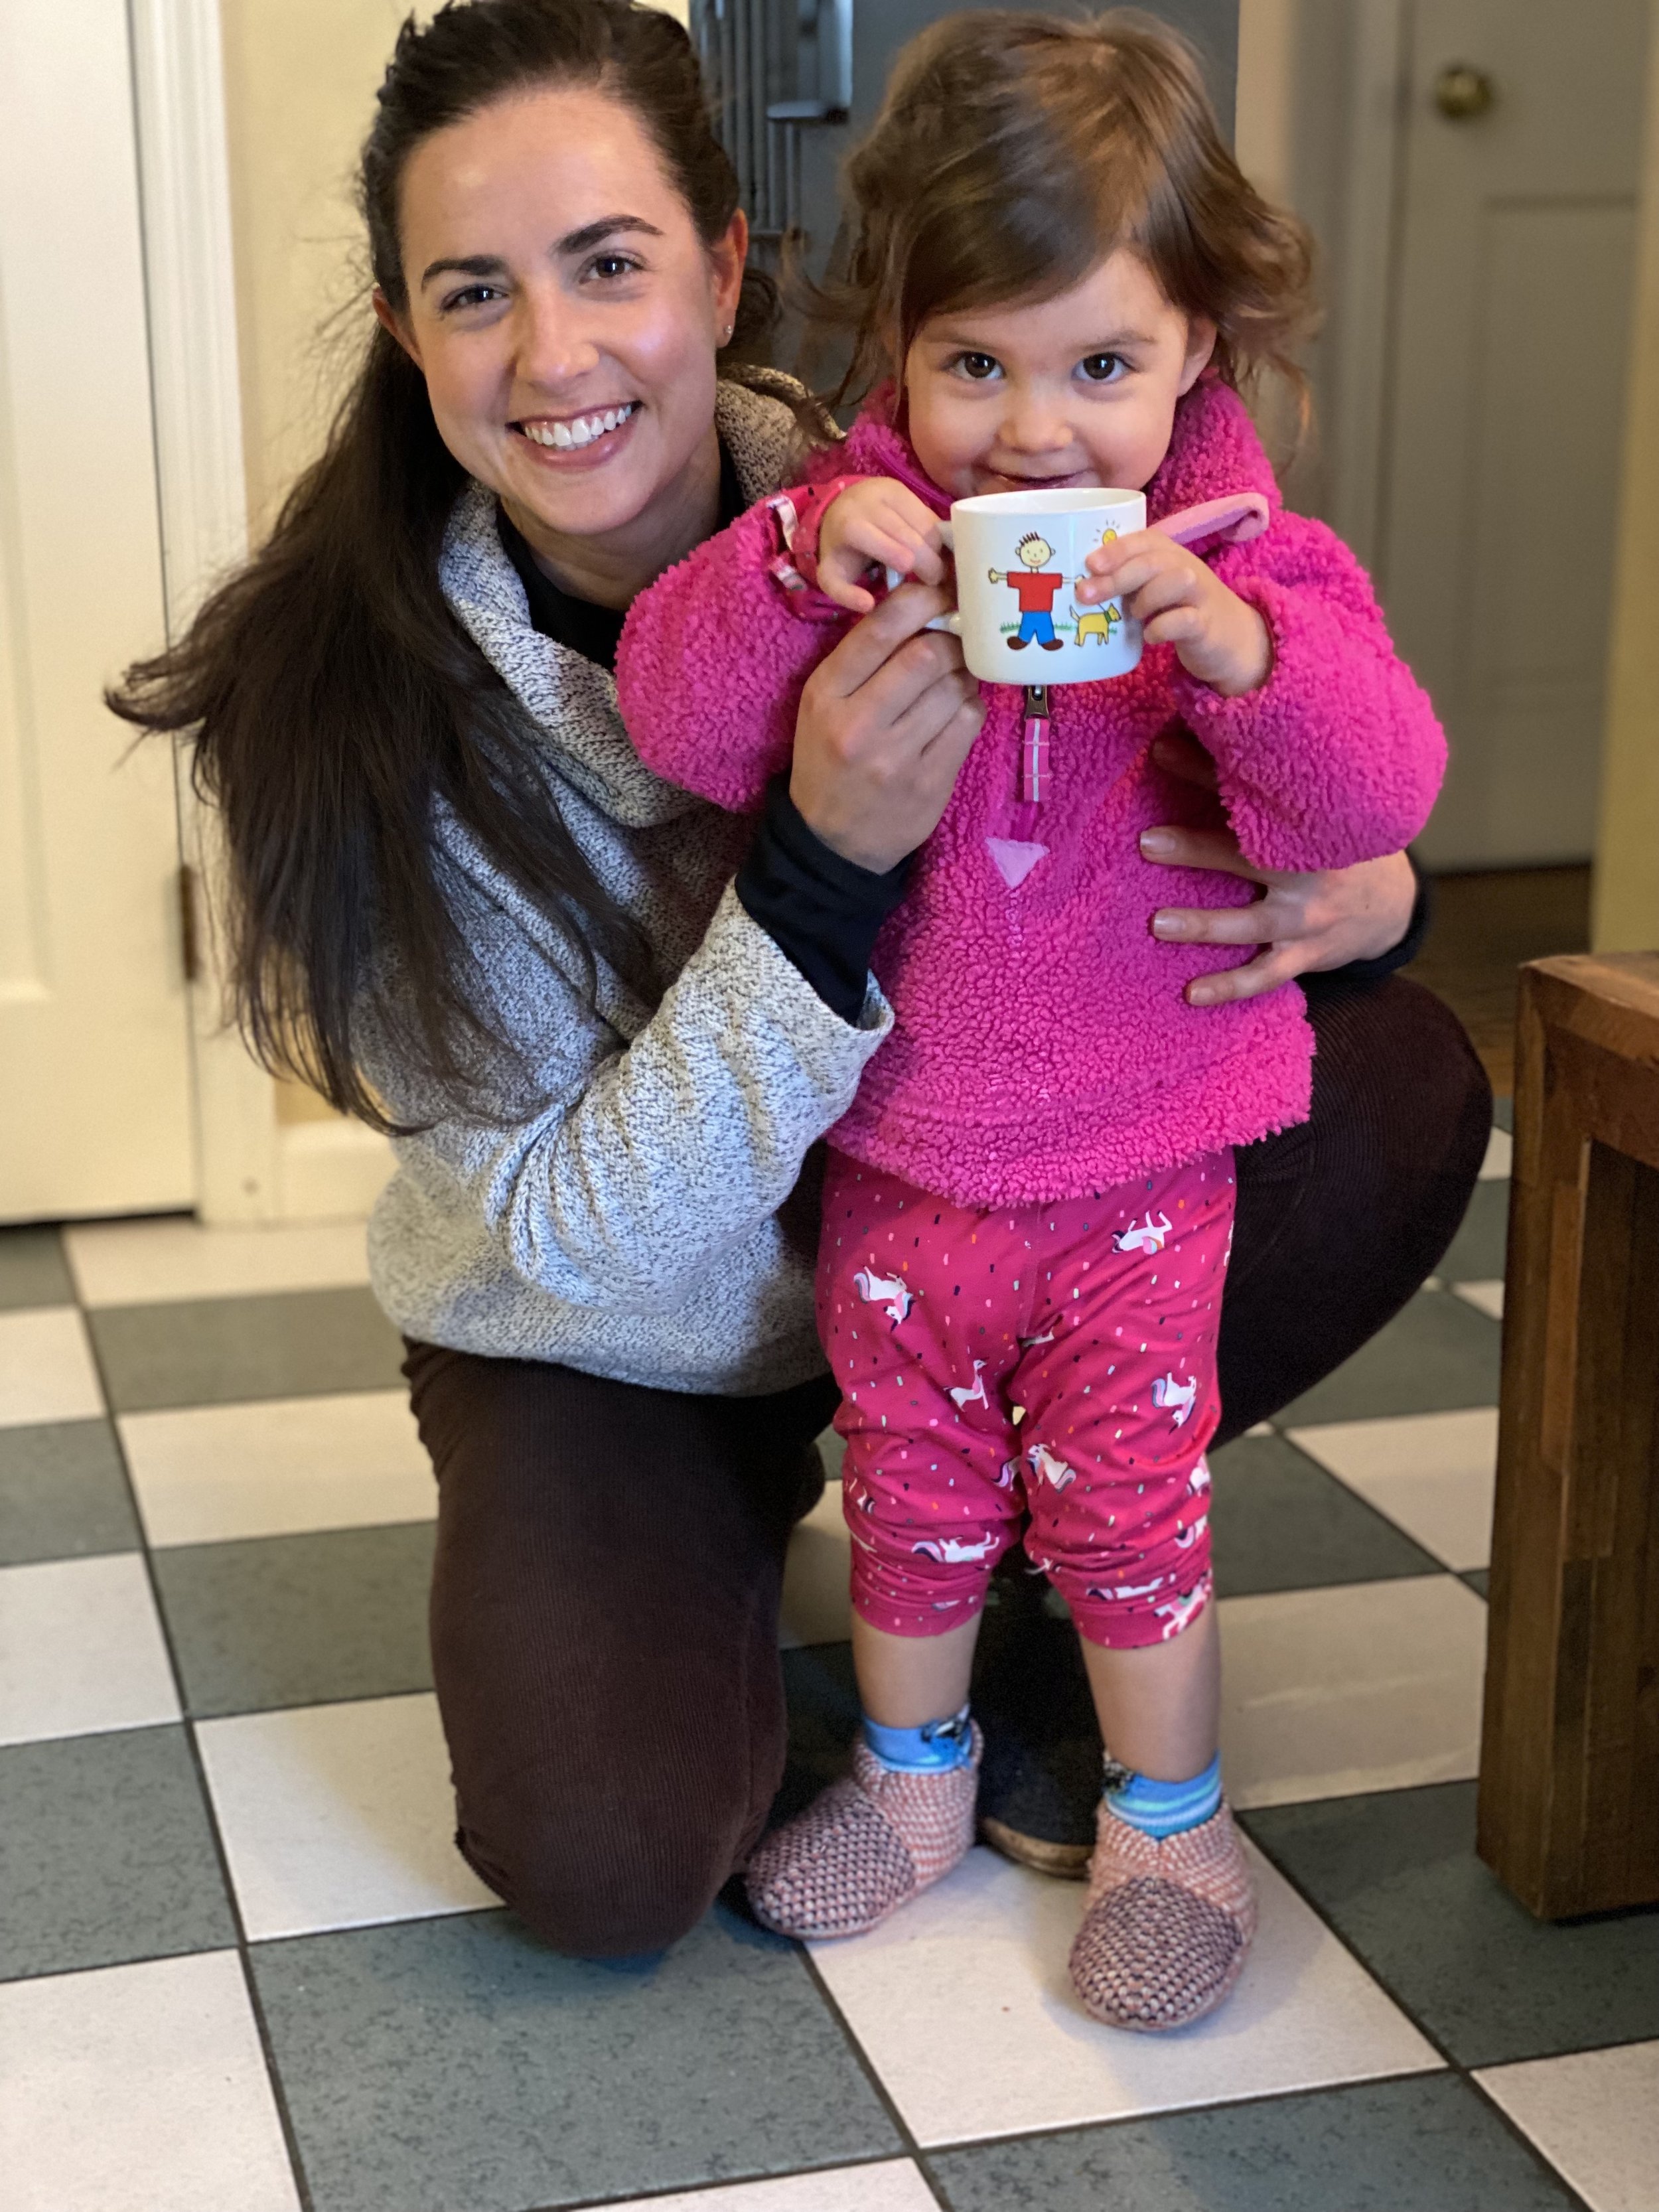 smiling aunt with her 2 year old niece dressed in pink holding a mug